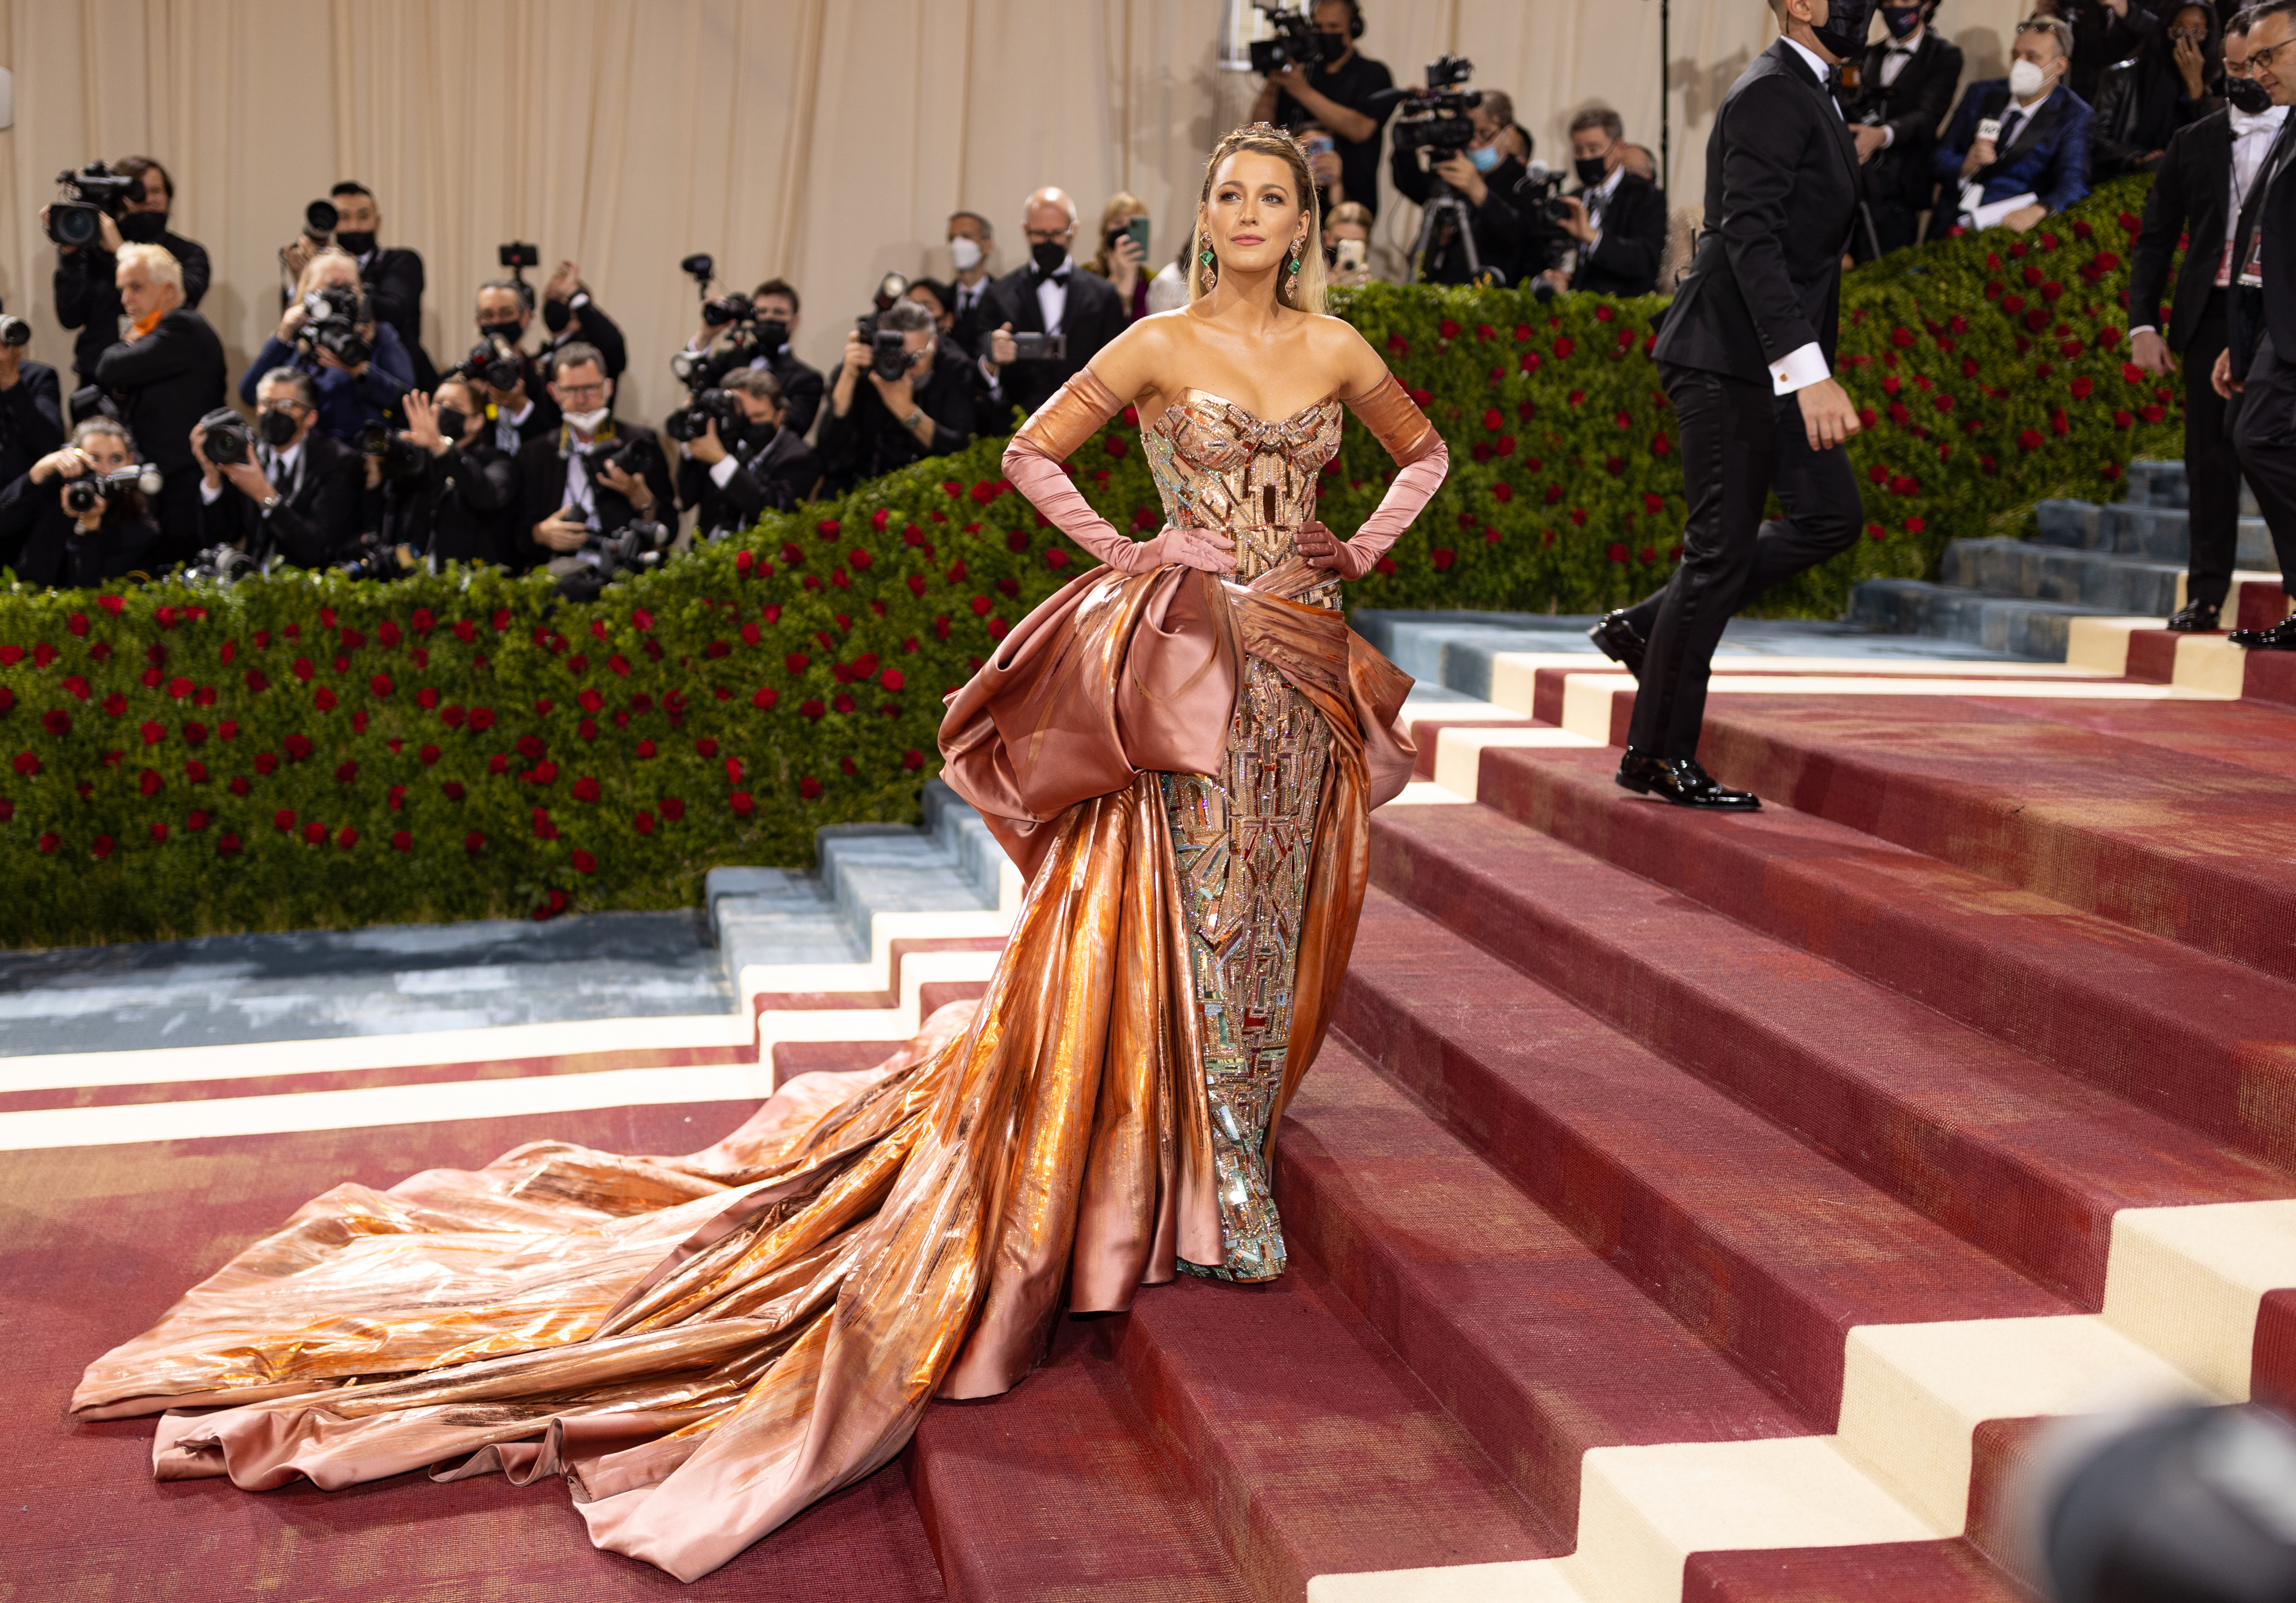 Blake Lively at The 2022 Met Gala at the The Metropolitan Museum of Art on May 2, 2022 in New York City.